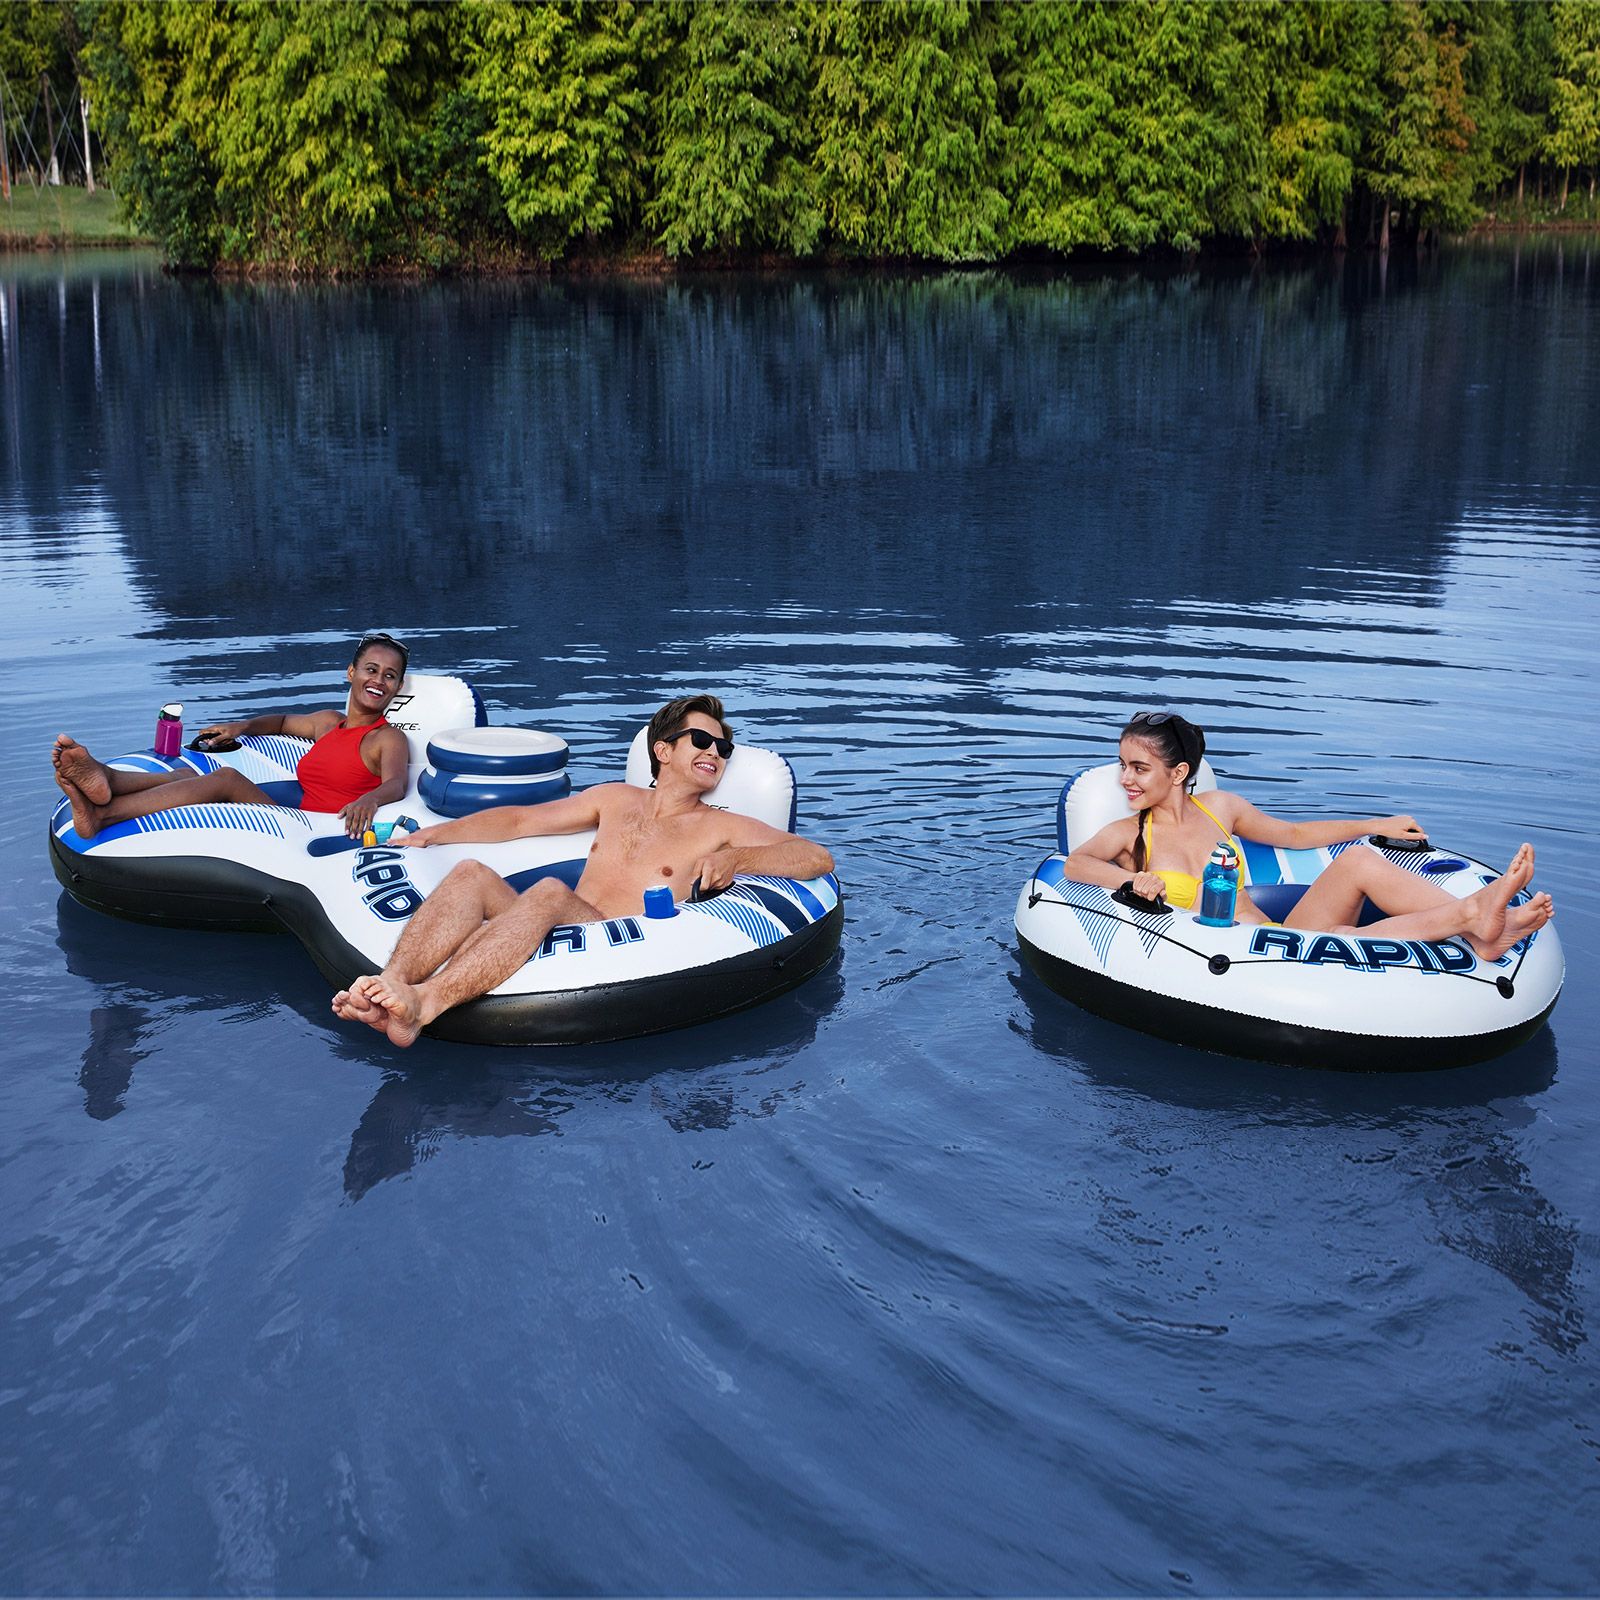 Bestway Floating Island Pool Float Tubes 2 Man River Tube Water Raft Inflatable Watersport Rapid Rider Double Innertube Lake Lounger with Cooler